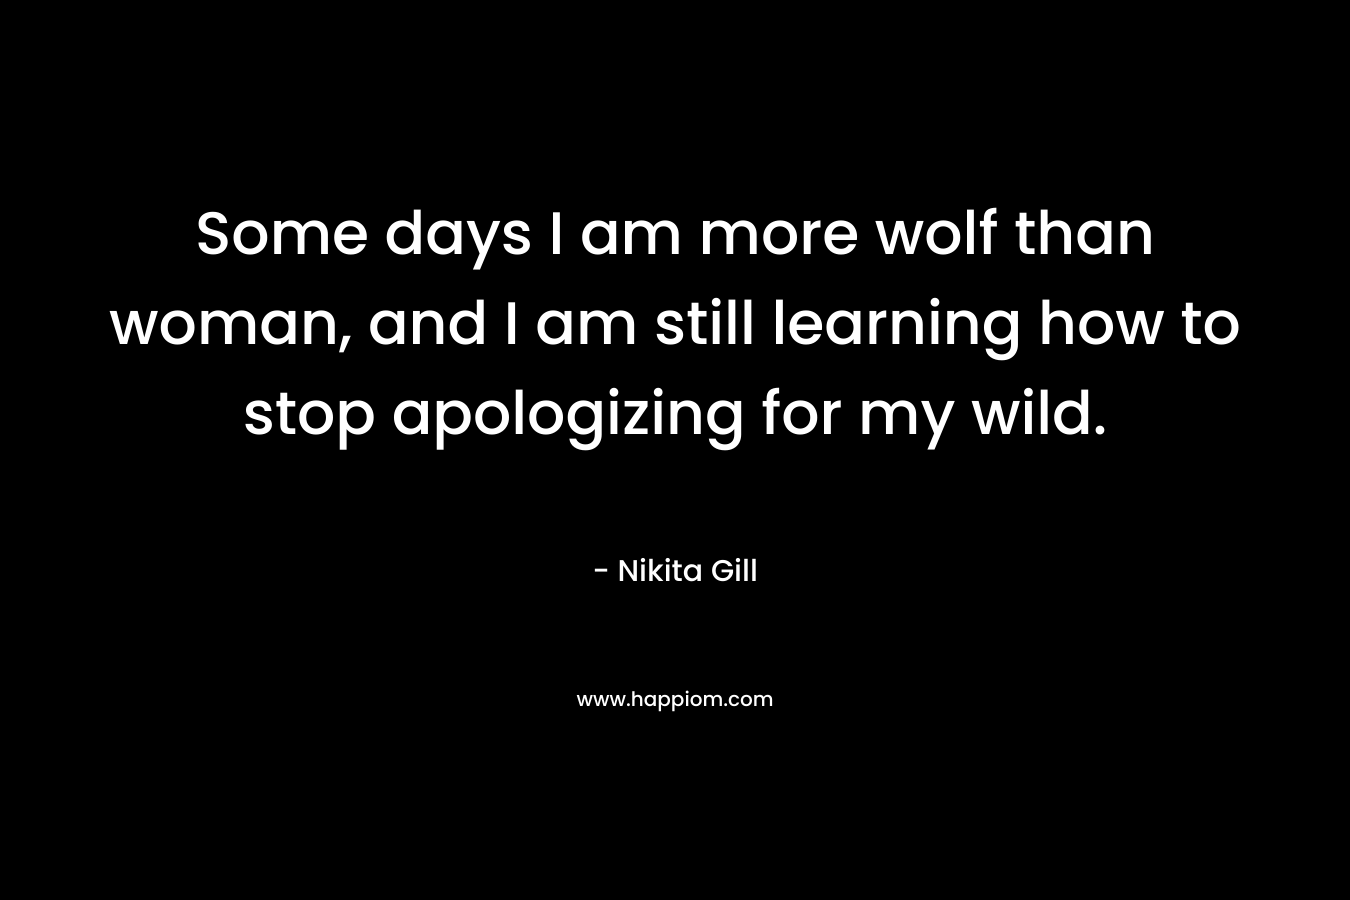 Some days I am more wolf than woman, and I am still learning how to stop apologizing for my wild. – Nikita Gill